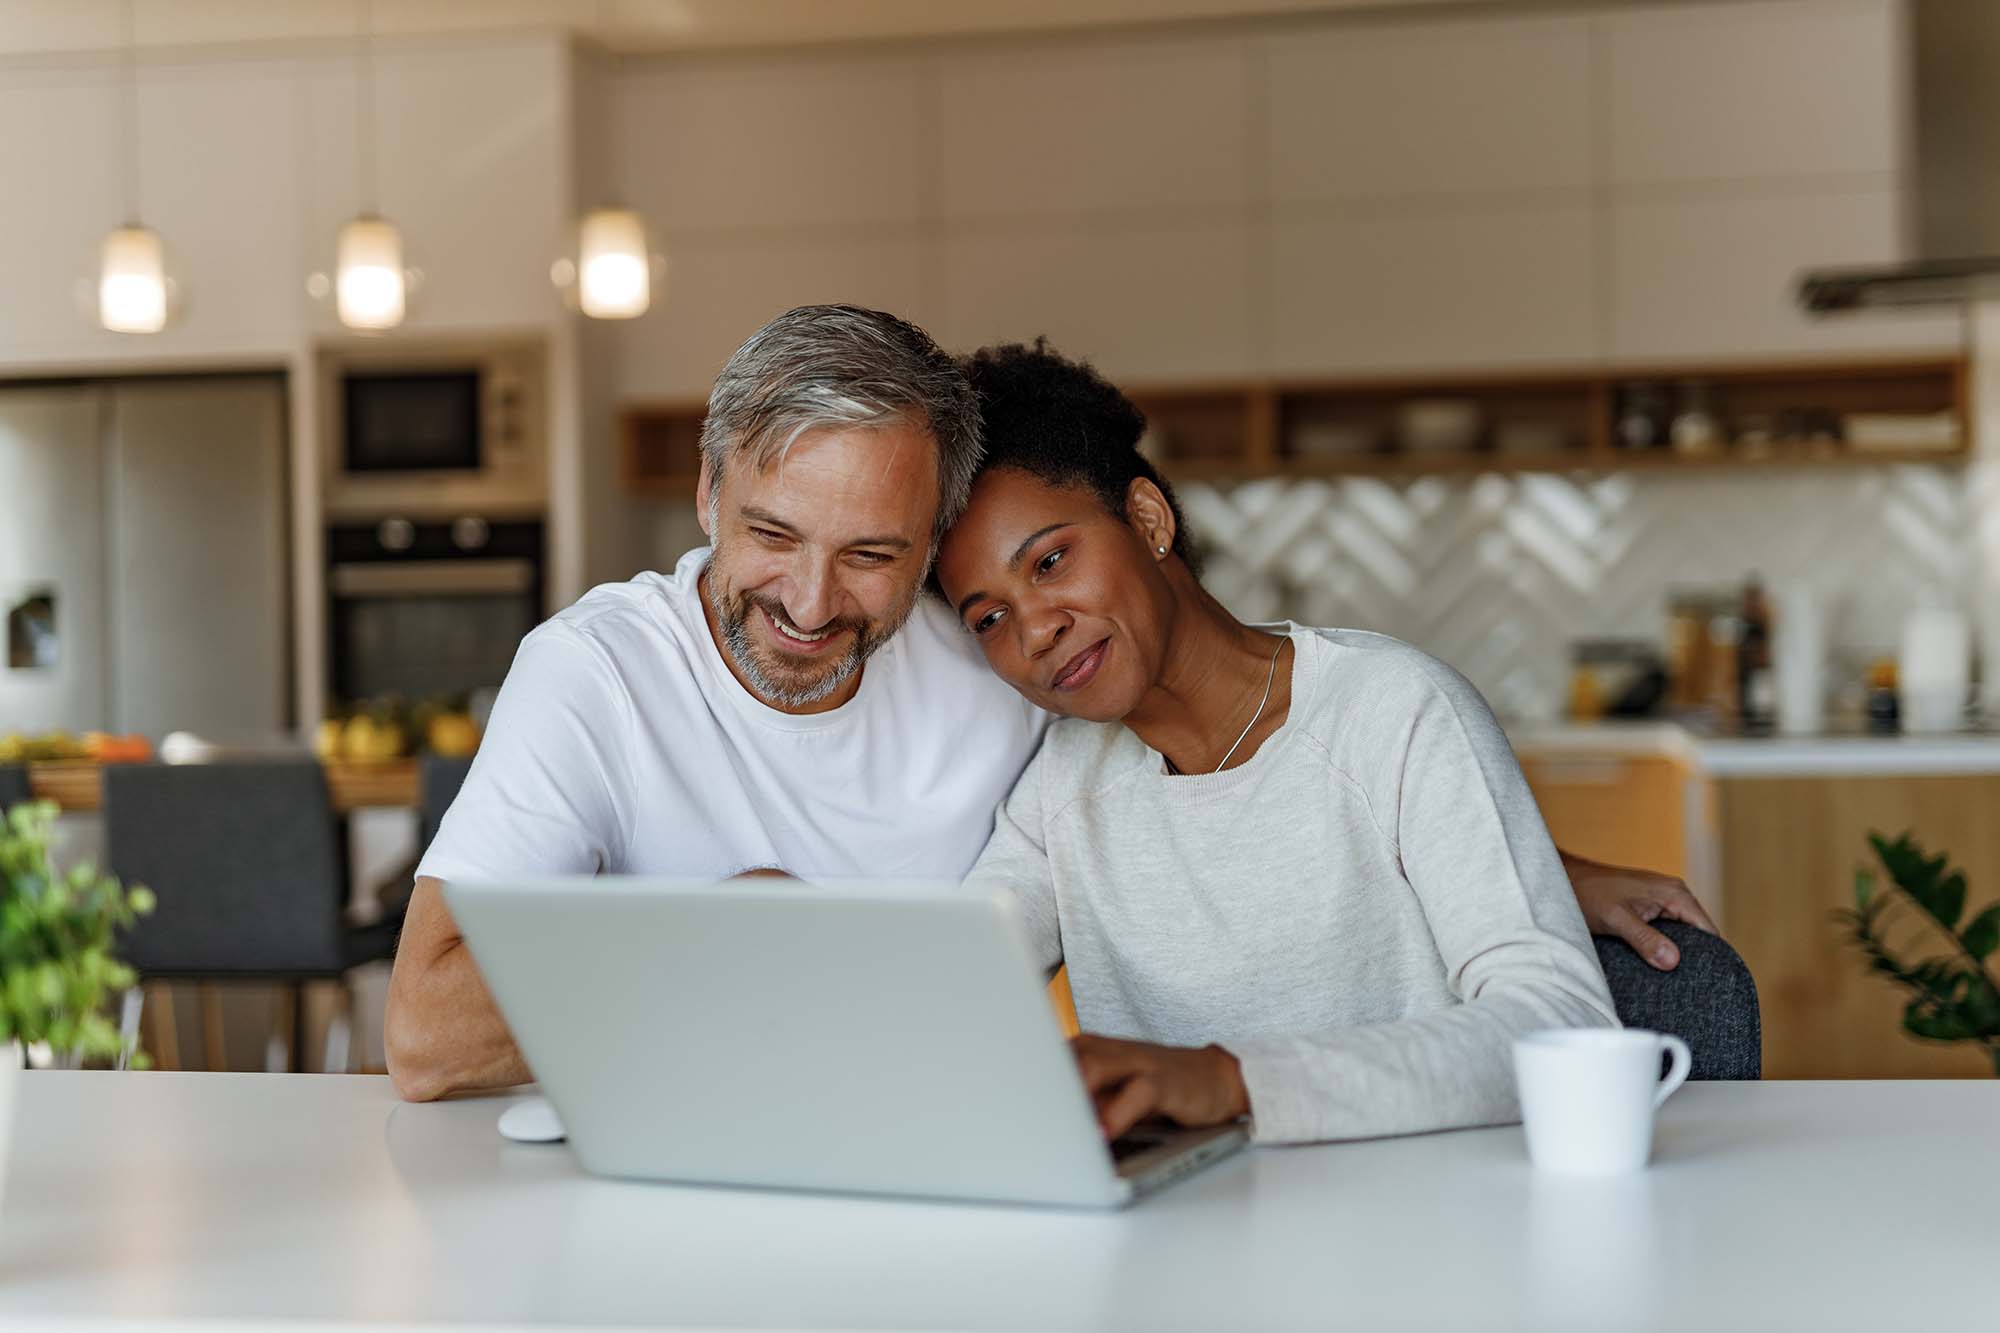 Couple in kitchen sitting together and looking at laptop